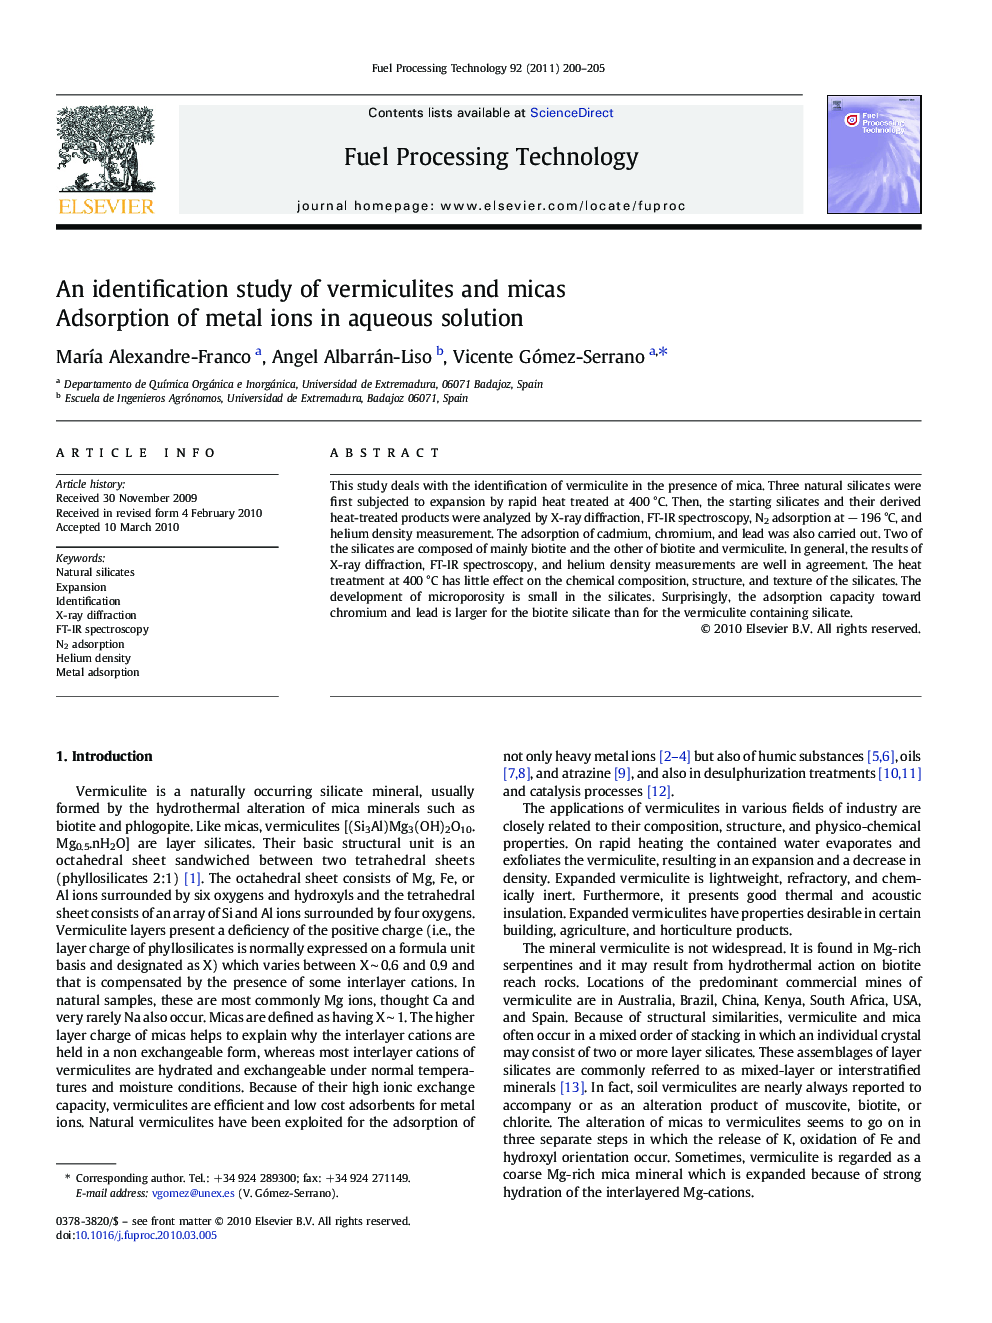 An identification study of vermiculites and micas: Adsorption of metal ions in aqueous solution